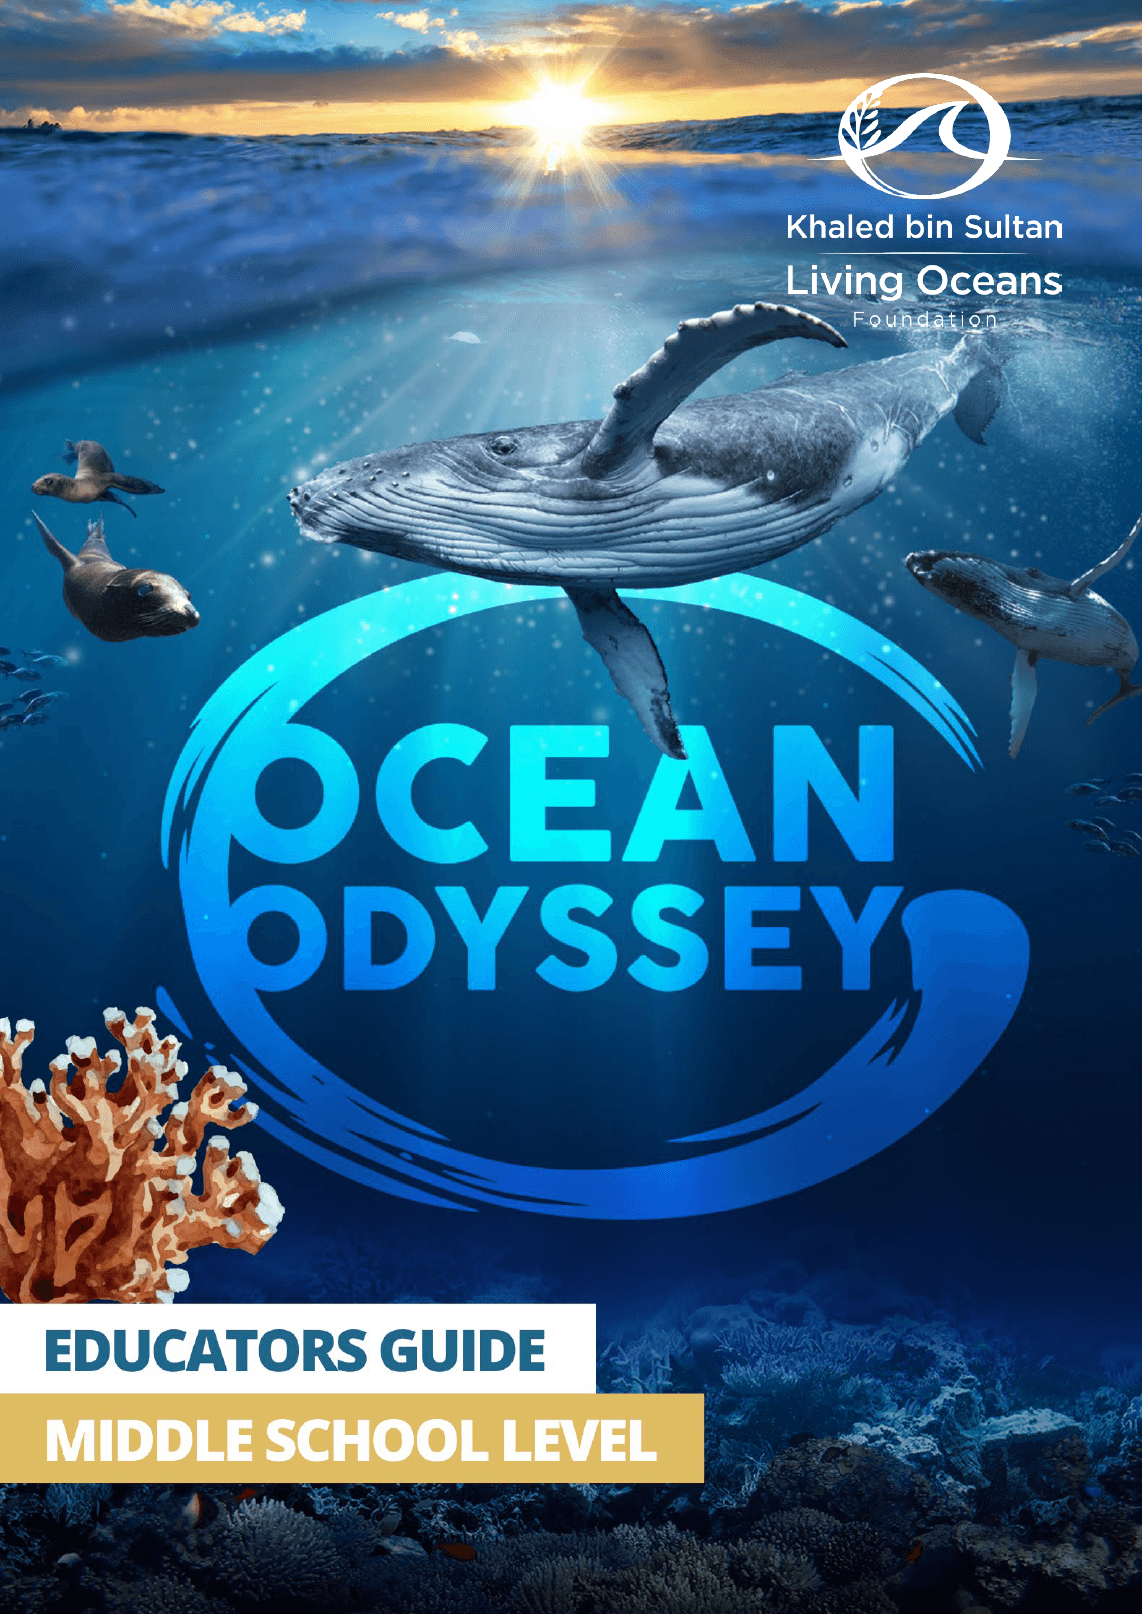 Announcing our Educator’s Guide for the IMAX film, Ocean Odyssey